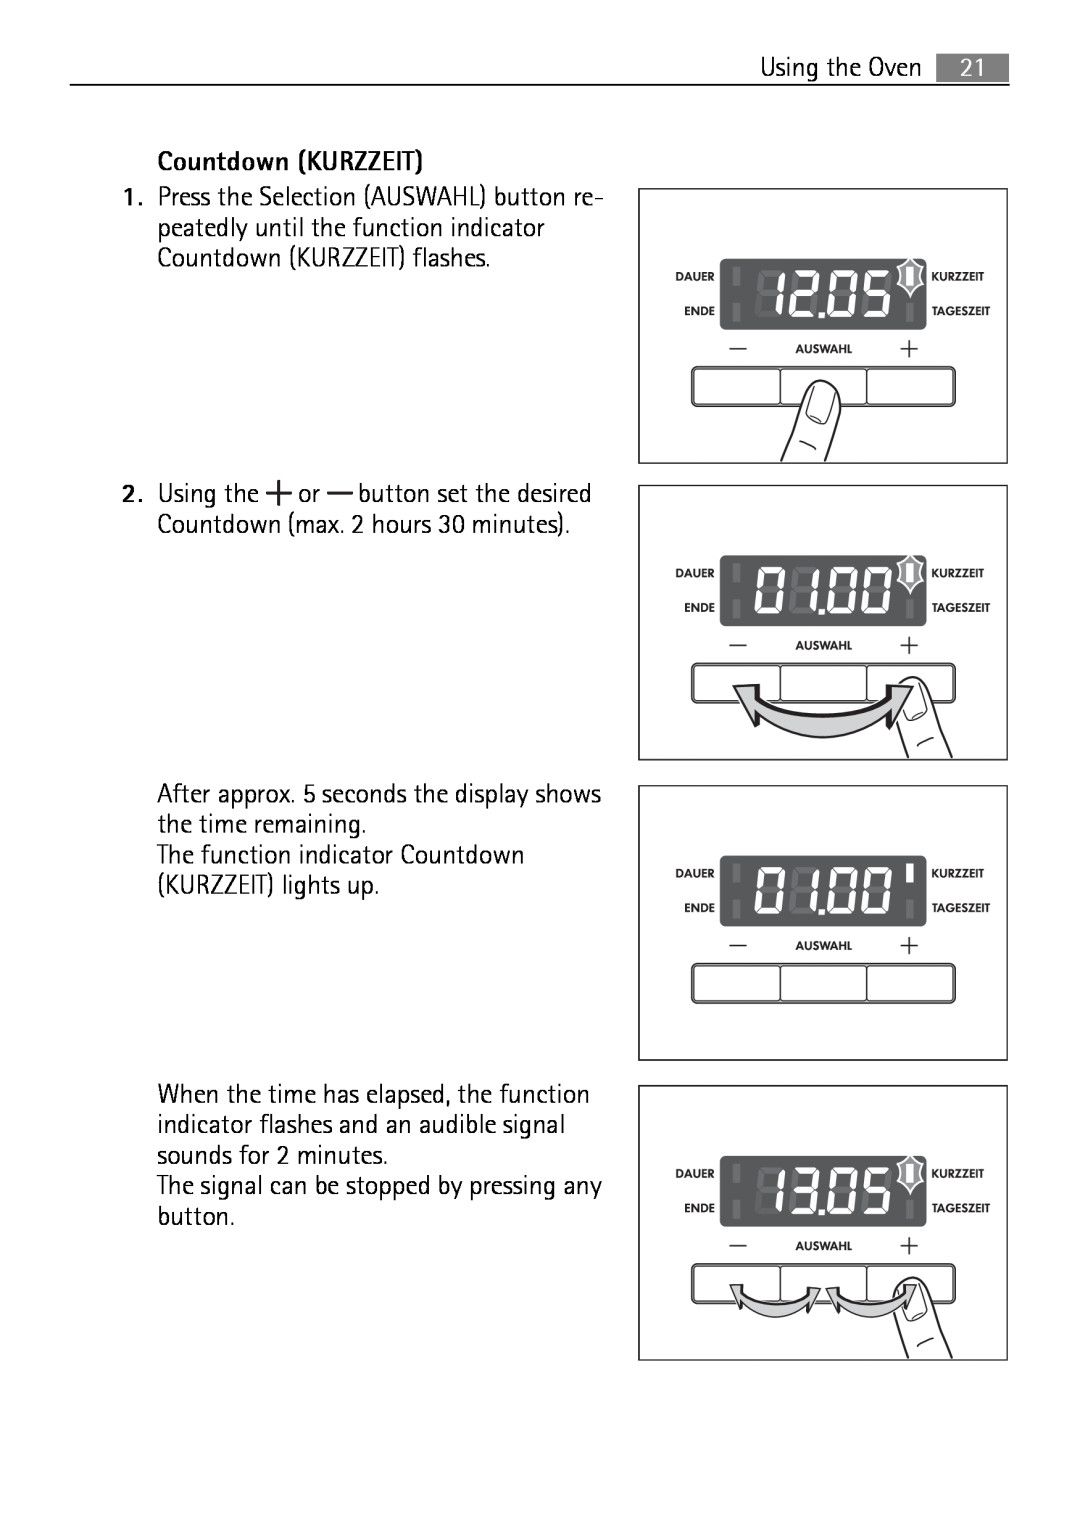 Electrolux E43012-5 user manual The function indicator Countdown KURZZEIT lights up 